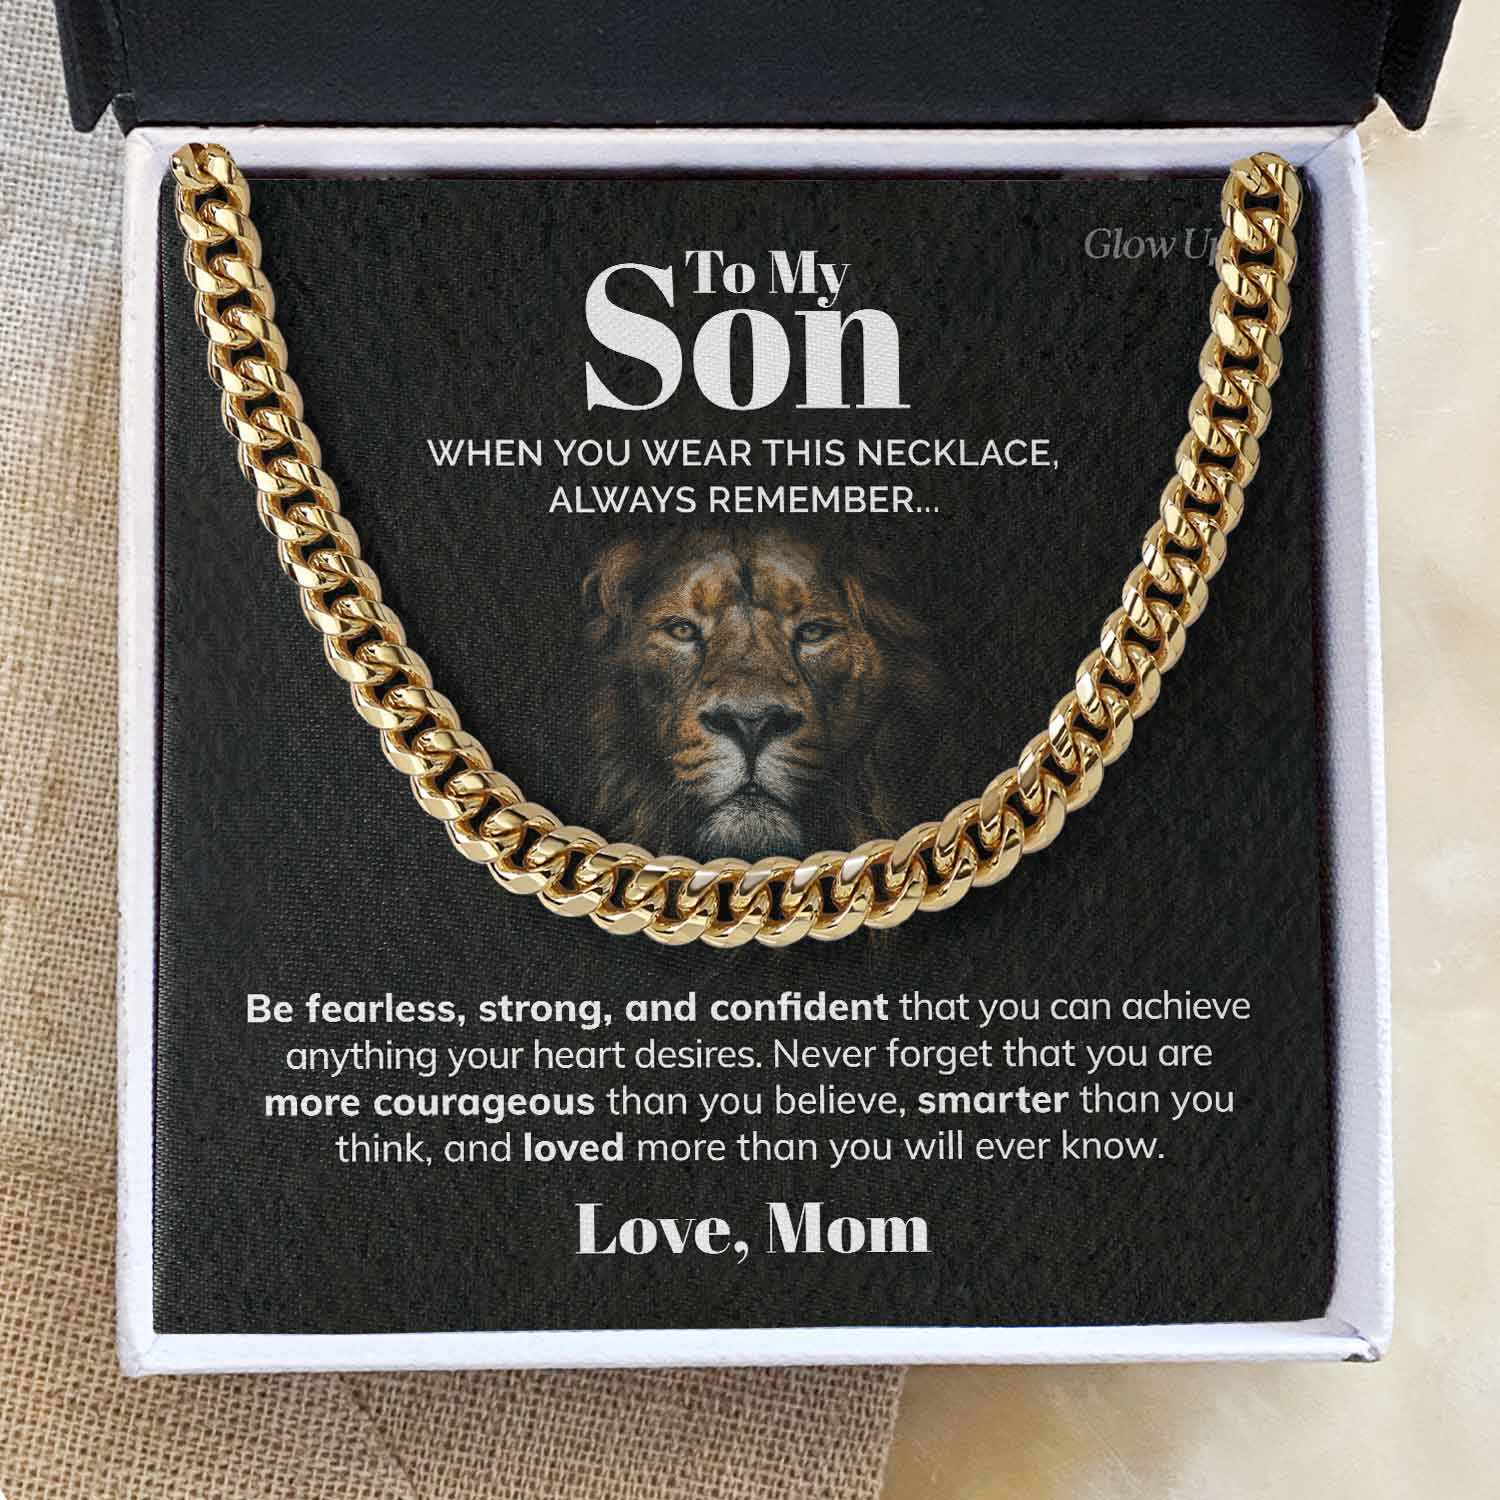 ShineOn Fulfillment Jewelry 14K Yellow Gold Finish / Standard Box To My Son - Be fearless - Cuban Link Chain